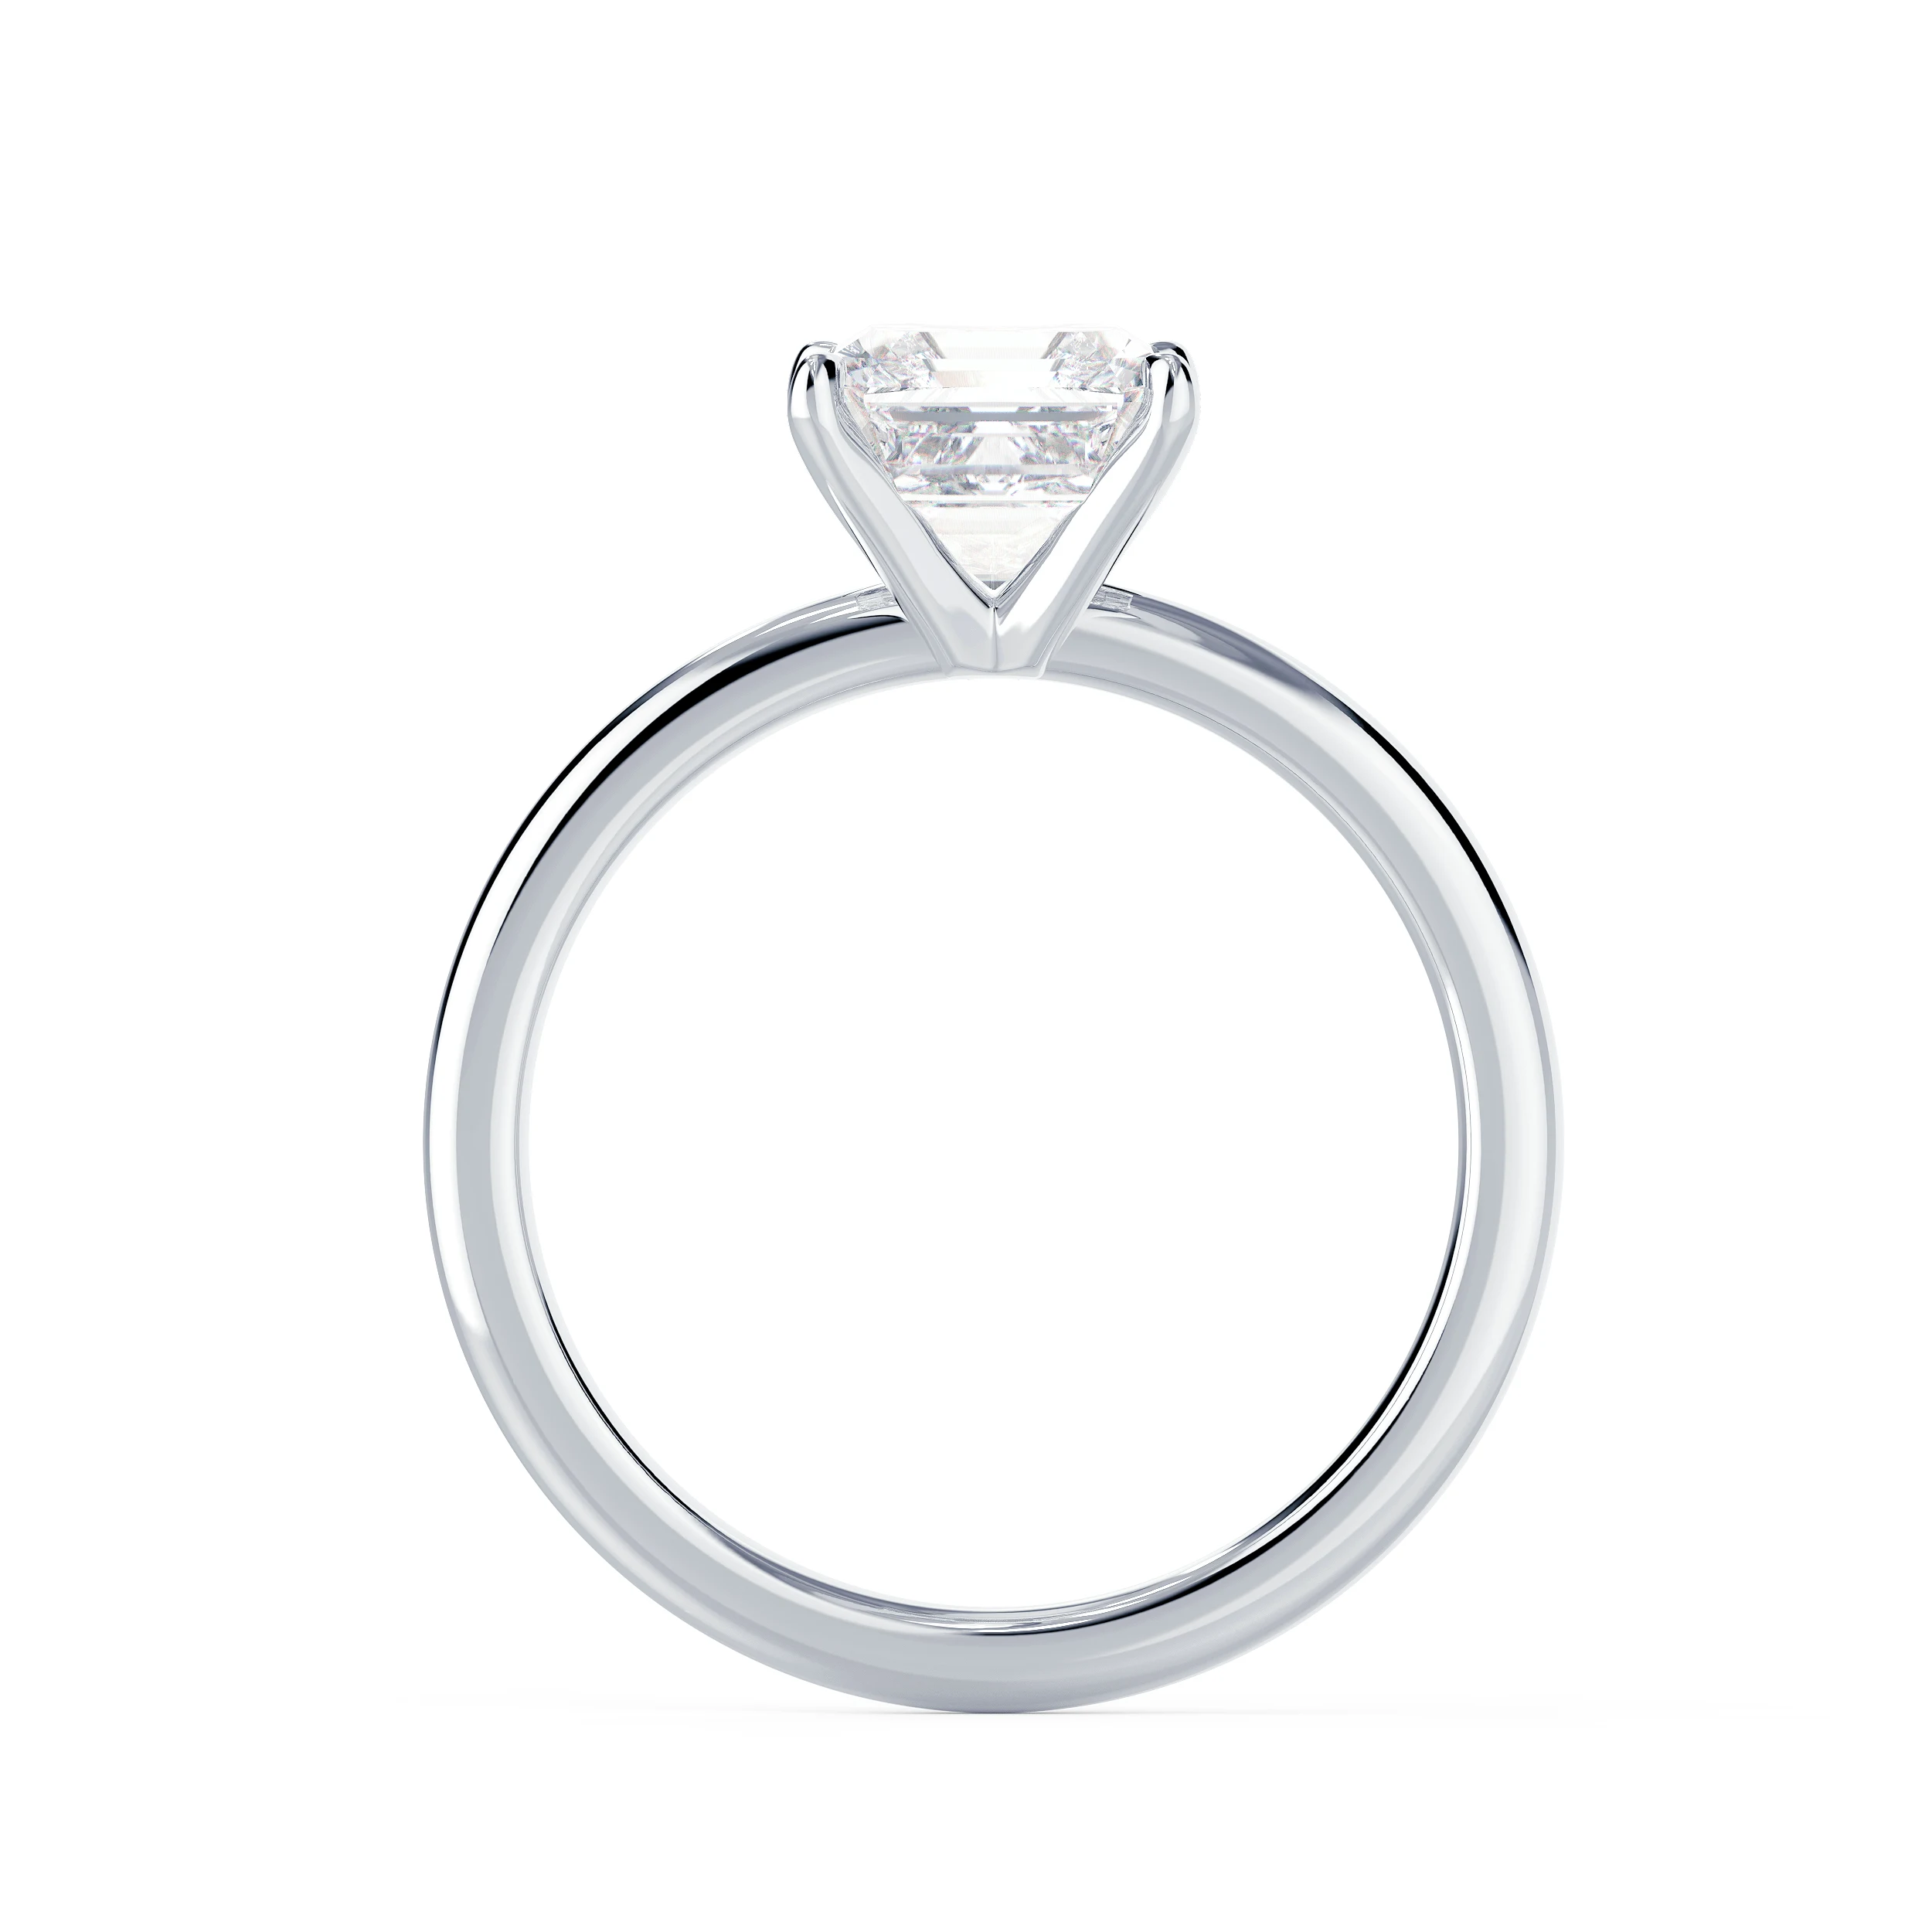 Lab Diamonds Asscher Cut Four Prong Solitaire Diamond Engagement Ring in White Gold (Profile View)